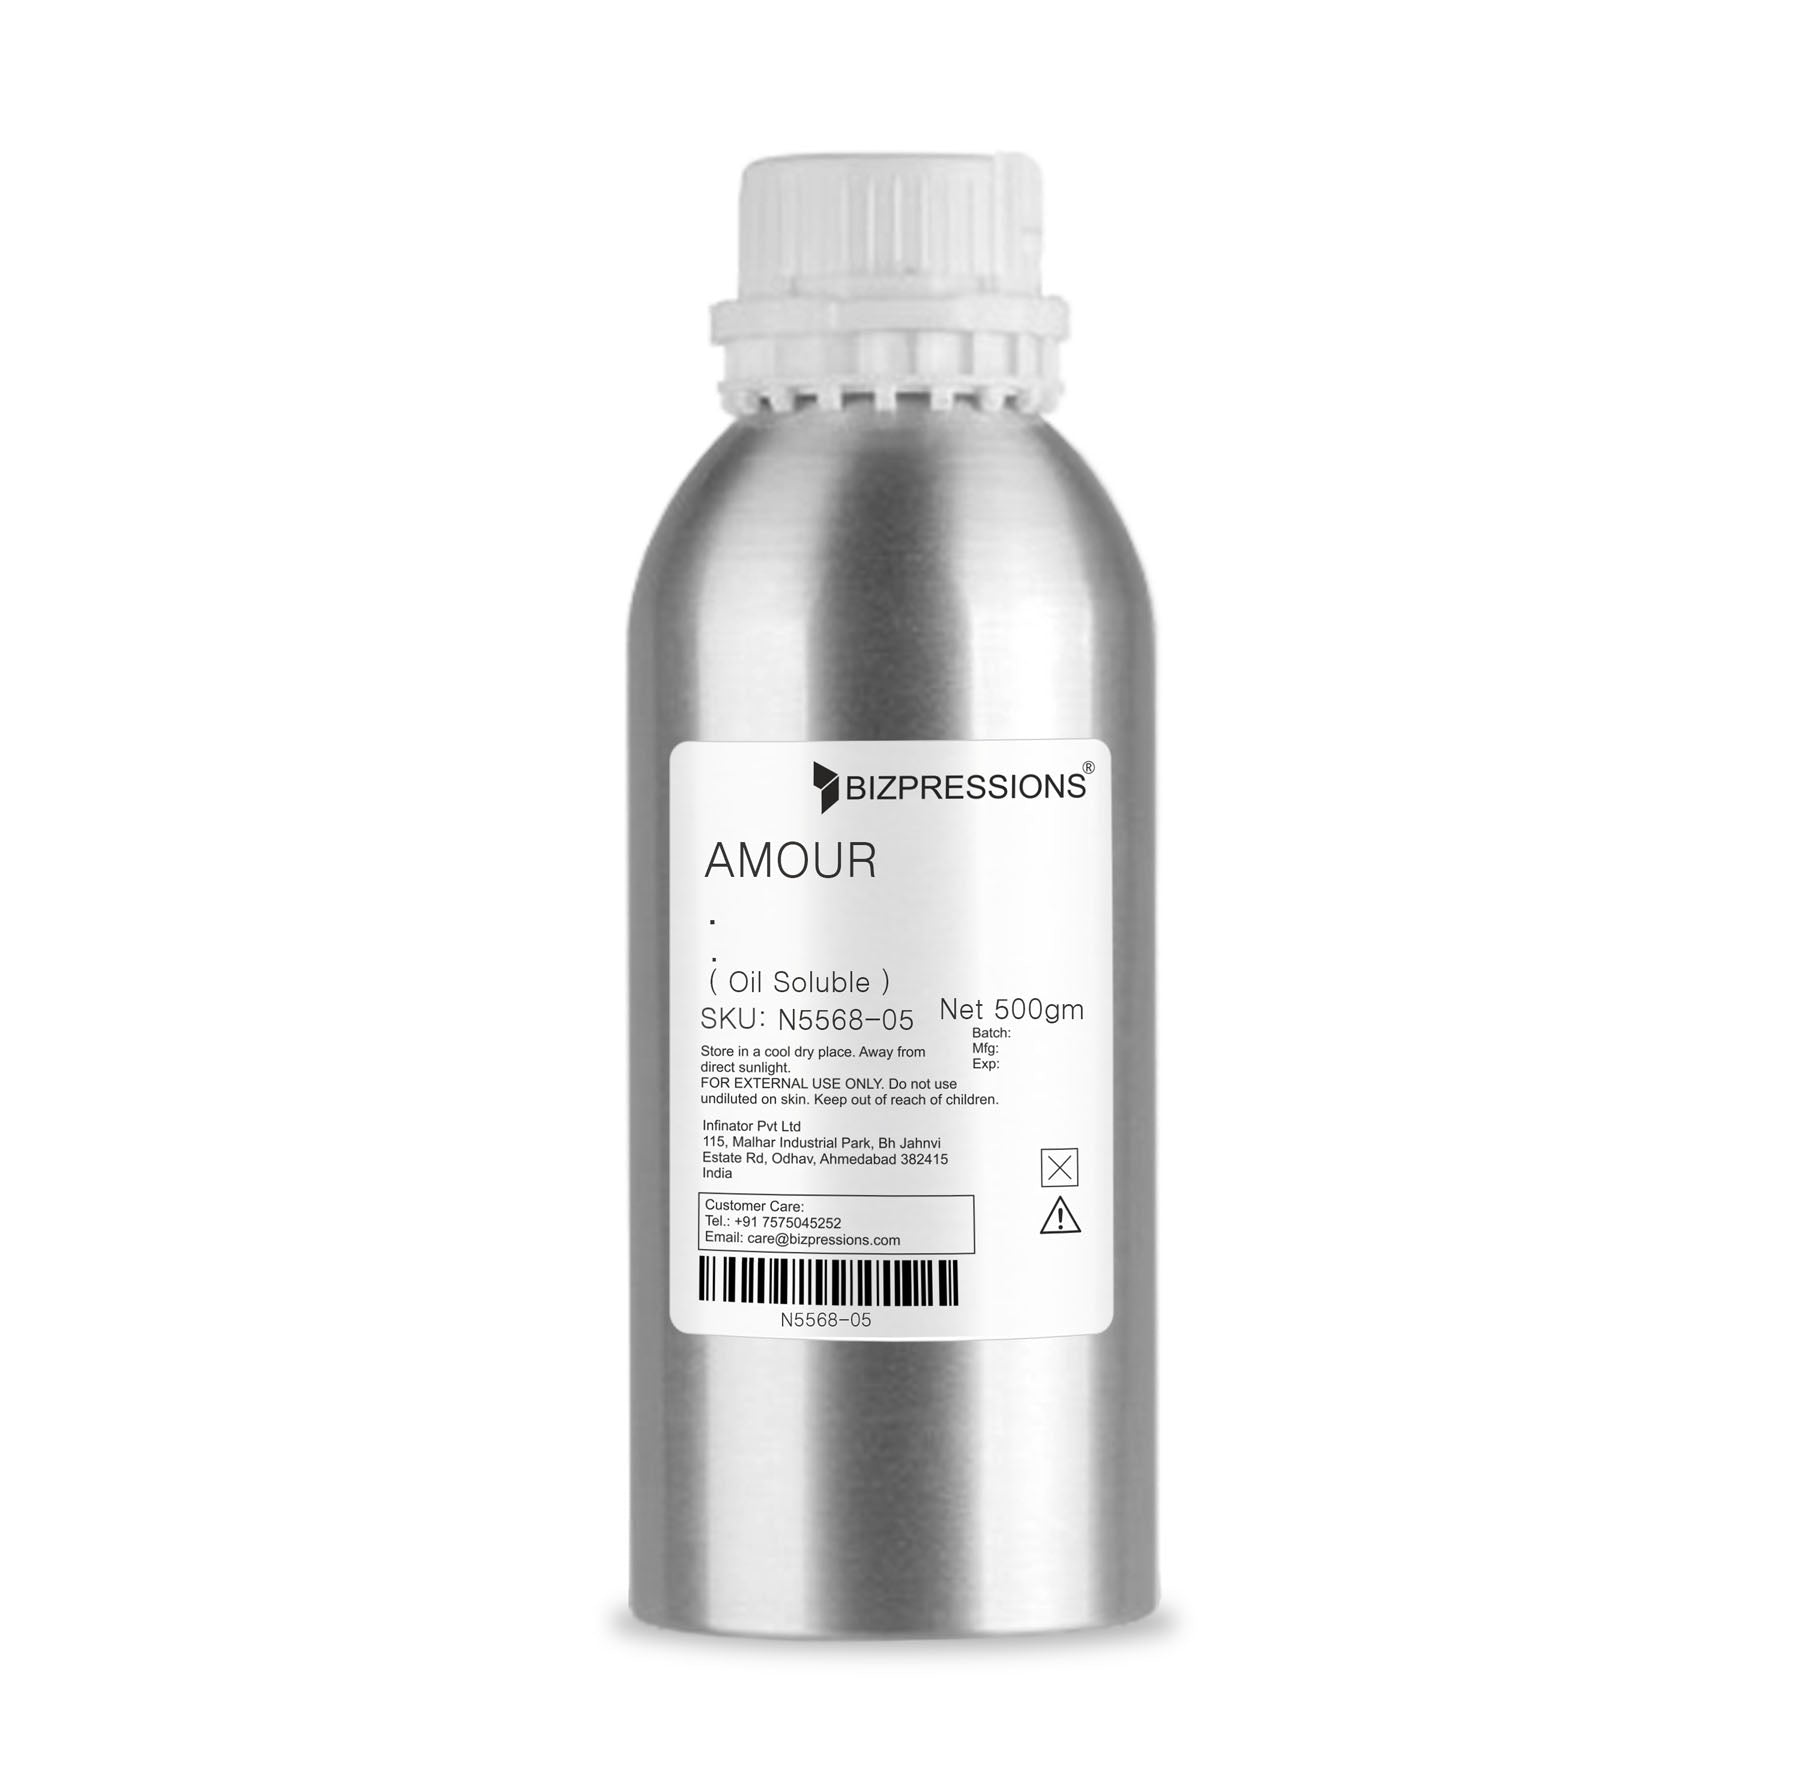 AMOUR - Fragrance ( Oil Soluble ) - 500 gm